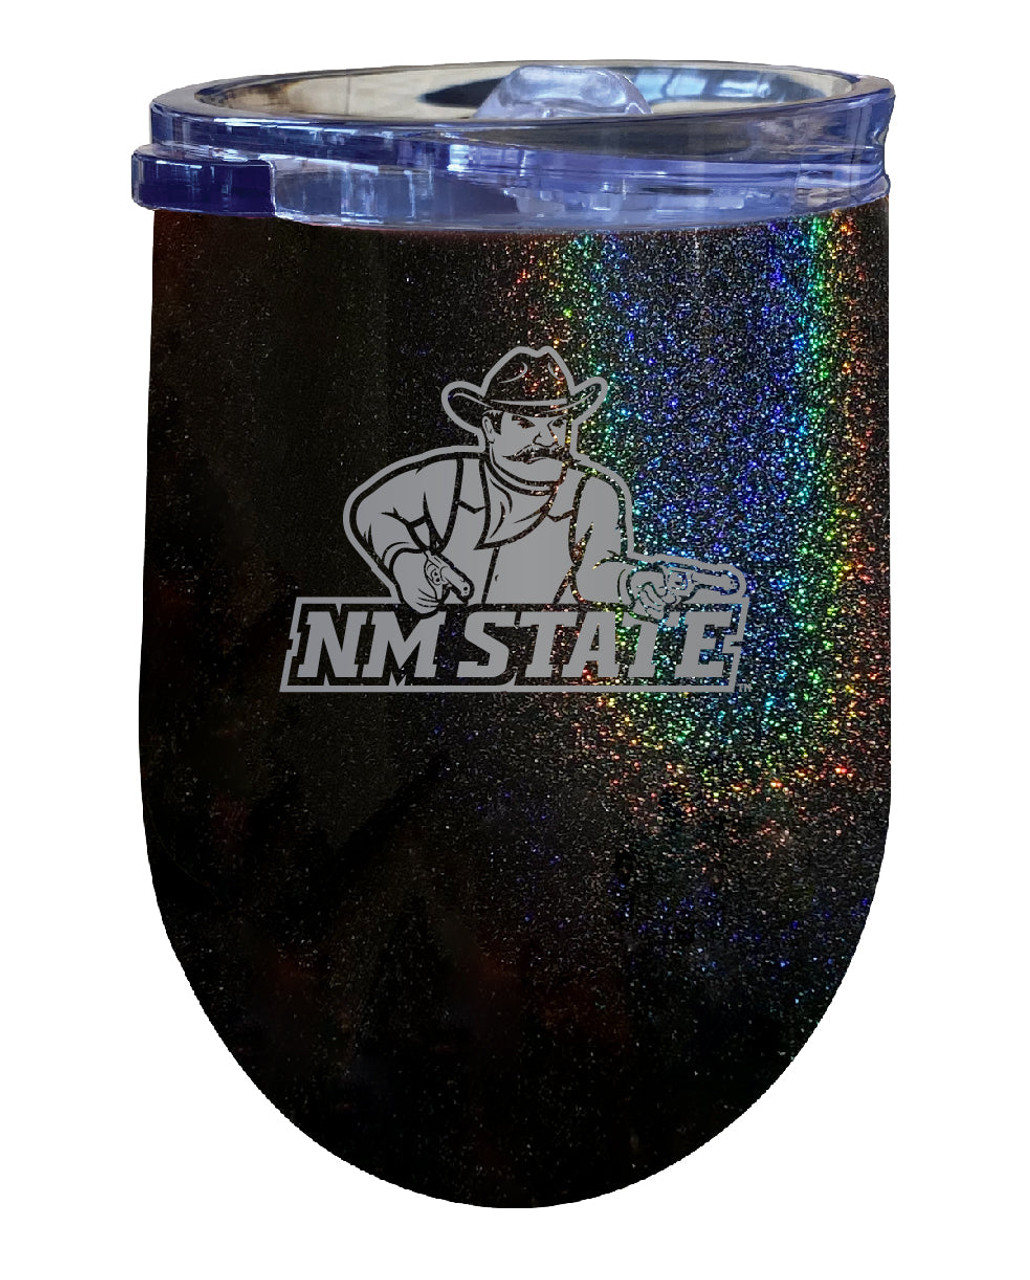 New Mexico State University Aggies 12 oz Laser Etched Insulated Wine Stainless Steel Tumbler Rainbow Glitter Black